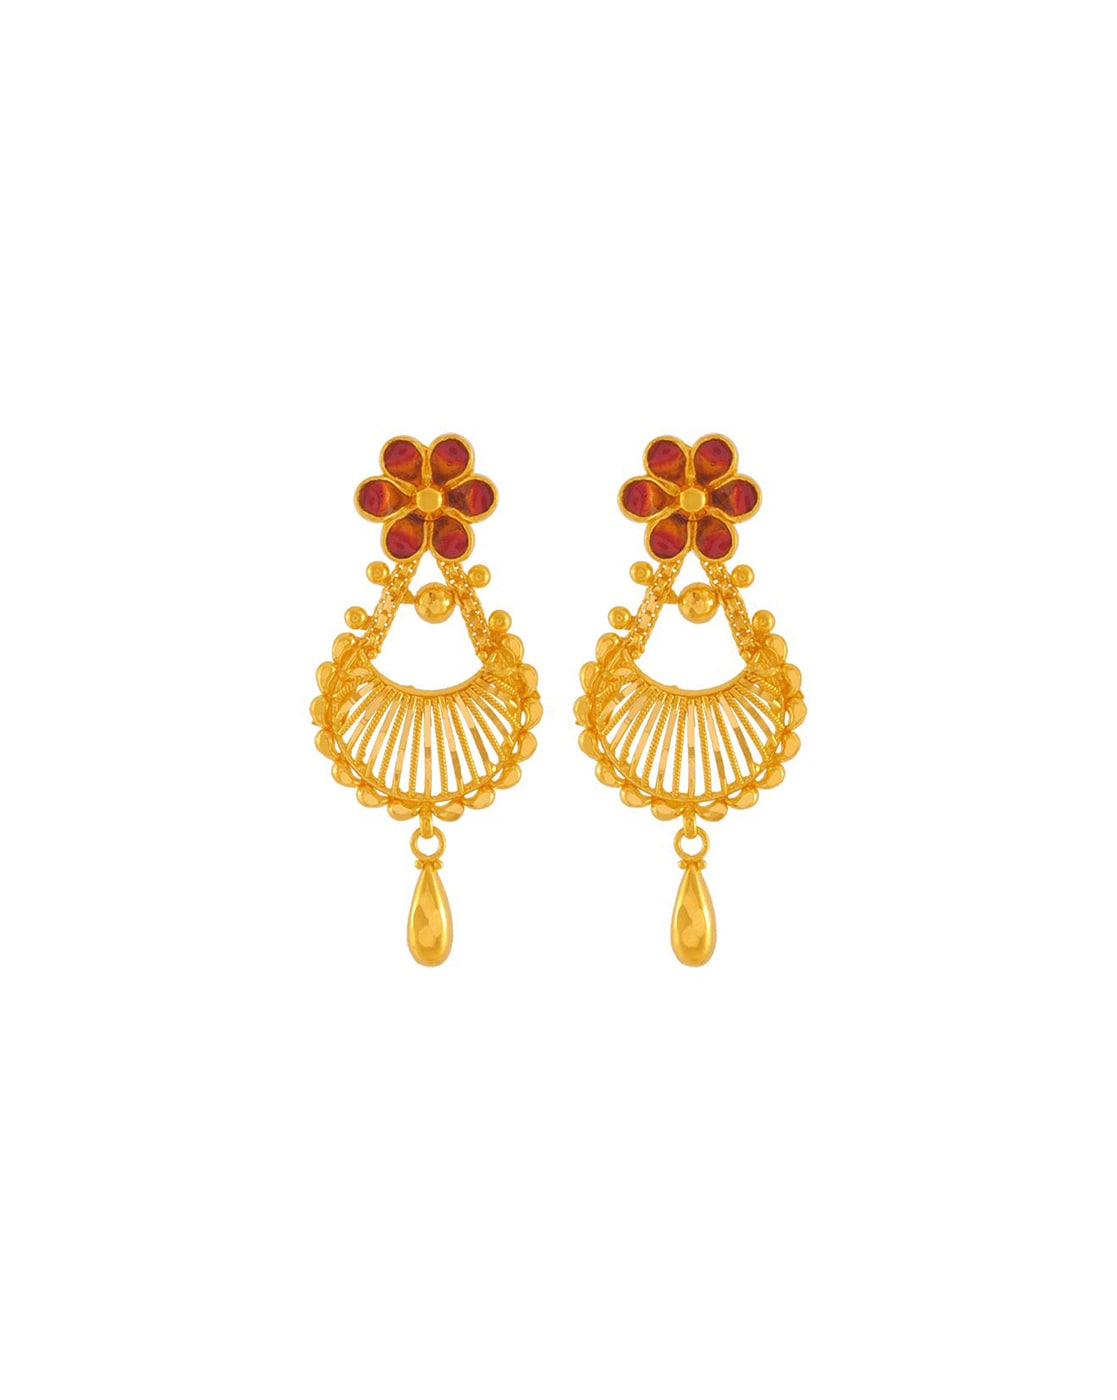 Unique 14k Gold PC Chandra Earrings From Amazea Collection